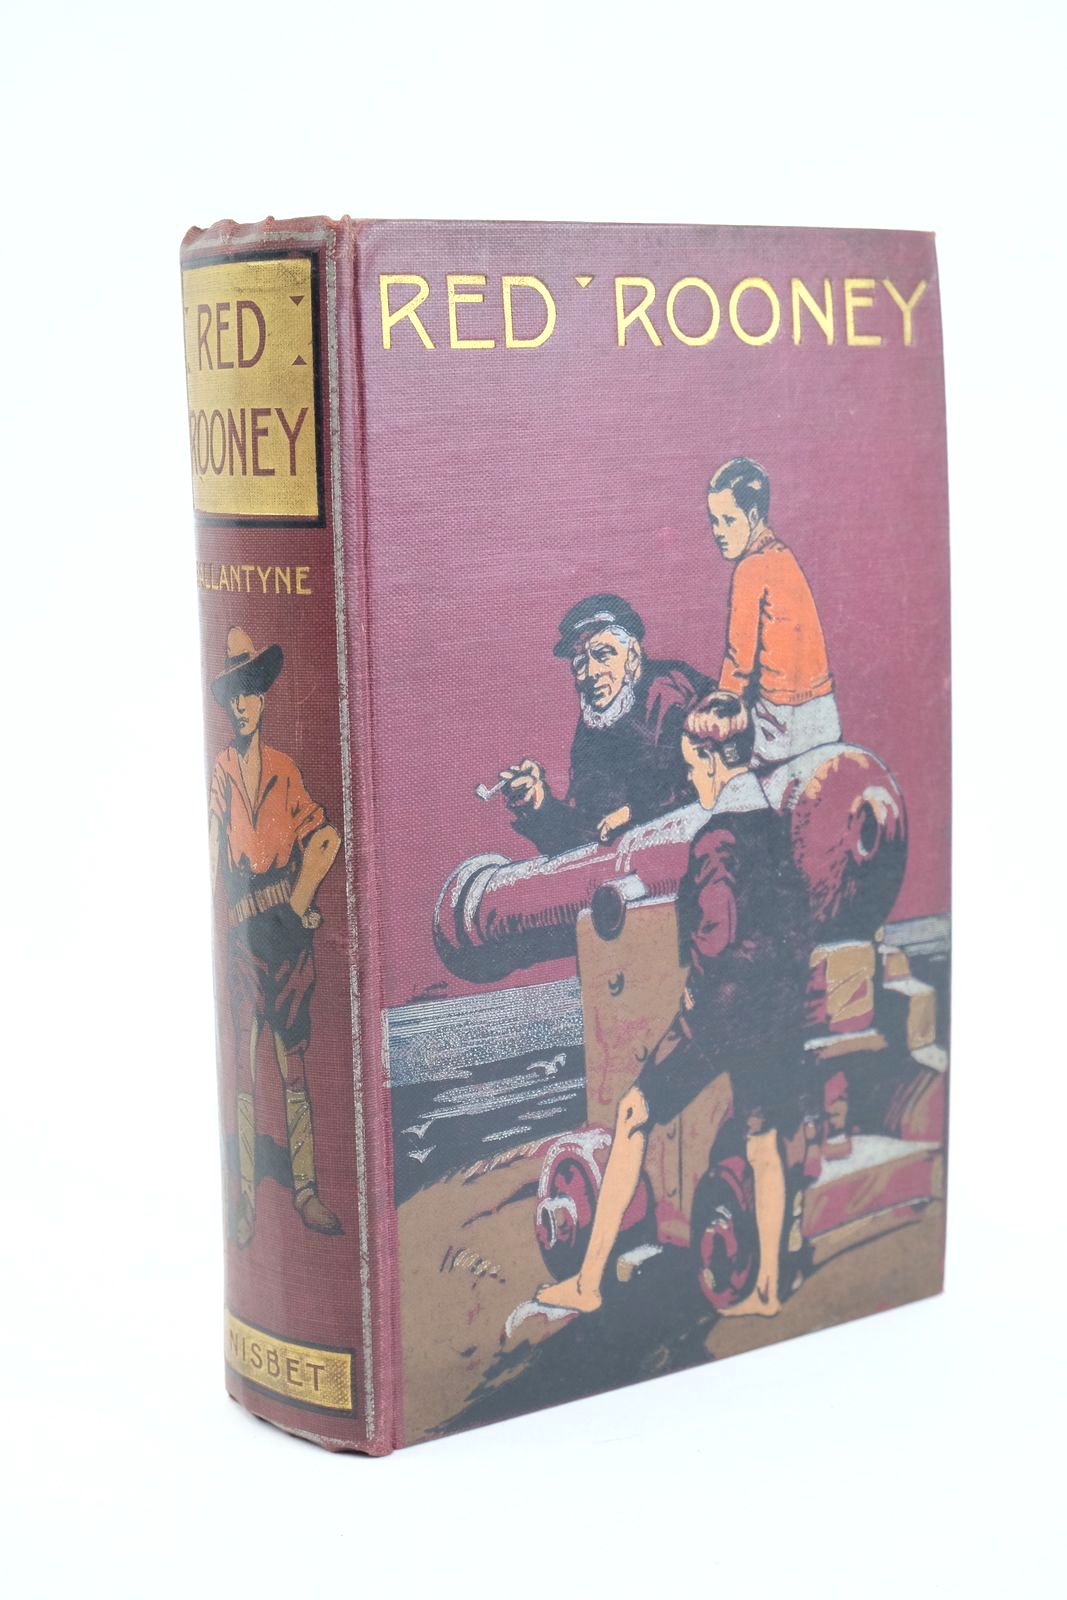 Photo of RED ROONEY written by Ballantyne, R.M. published by James Nisbet (STOCK CODE: 1323809)  for sale by Stella & Rose's Books